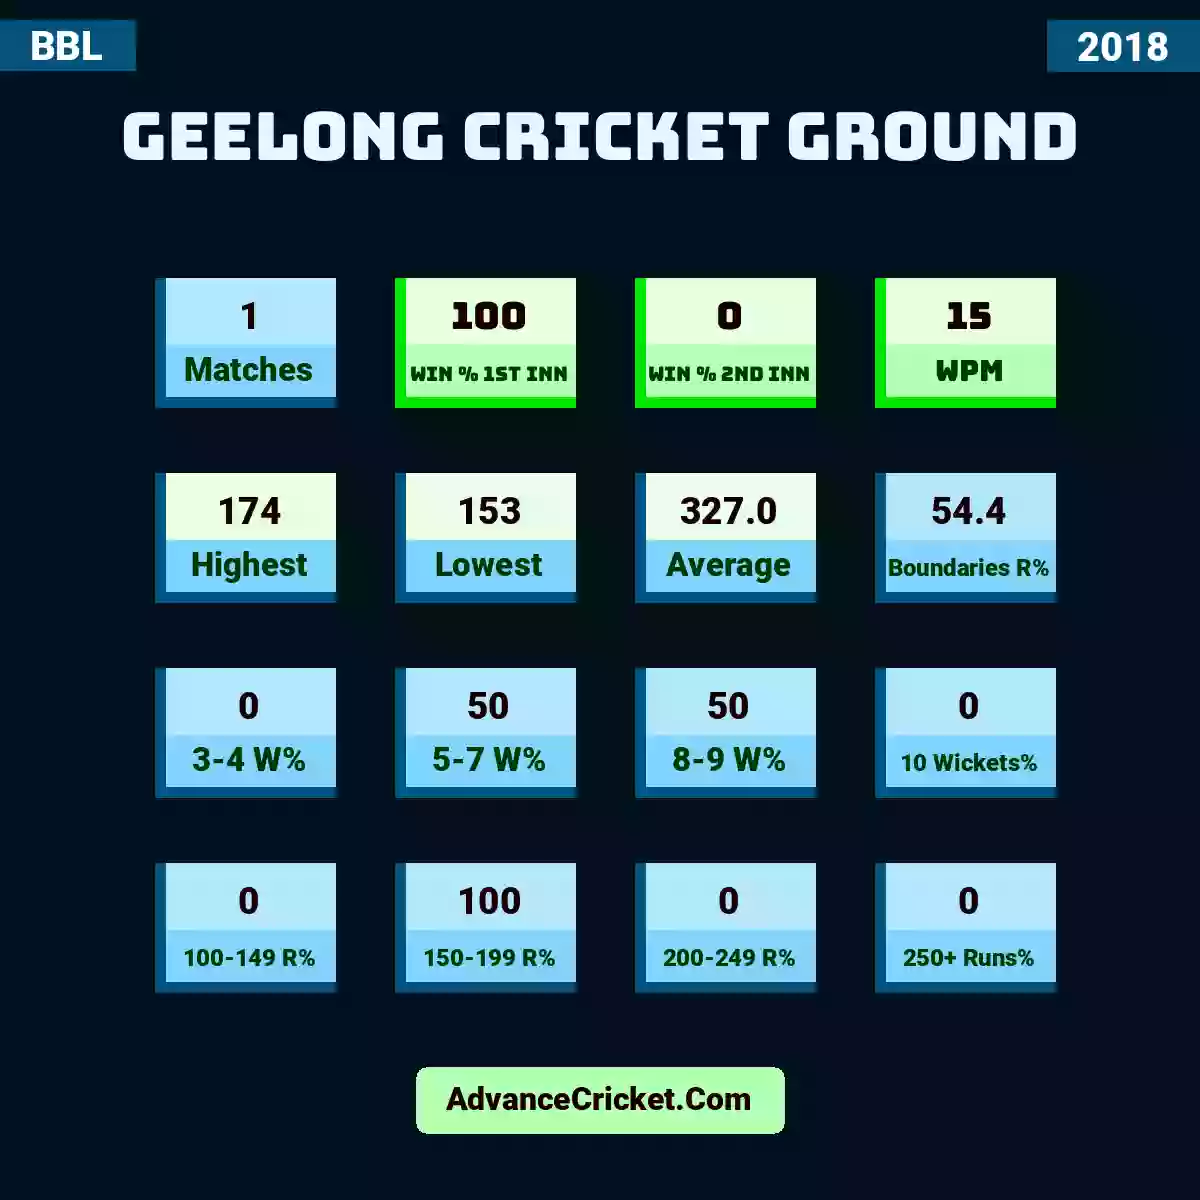 Image showing Geelong Cricket Ground with Matches: 1, Win % 1st Inn: 100, Win % 2nd Inn: 0, WPM: 15, Highest: 174, Lowest: 153, Average: 327.0, Boundaries R%: 54.4, 3-4 W%: 0, 5-7 W%: 50, 8-9 W%: 50, 10 Wickets%: 0, 100-149 R%: 0, 150-199 R%: 100, 200-249 R%: 0, 250+ Runs%: 0.